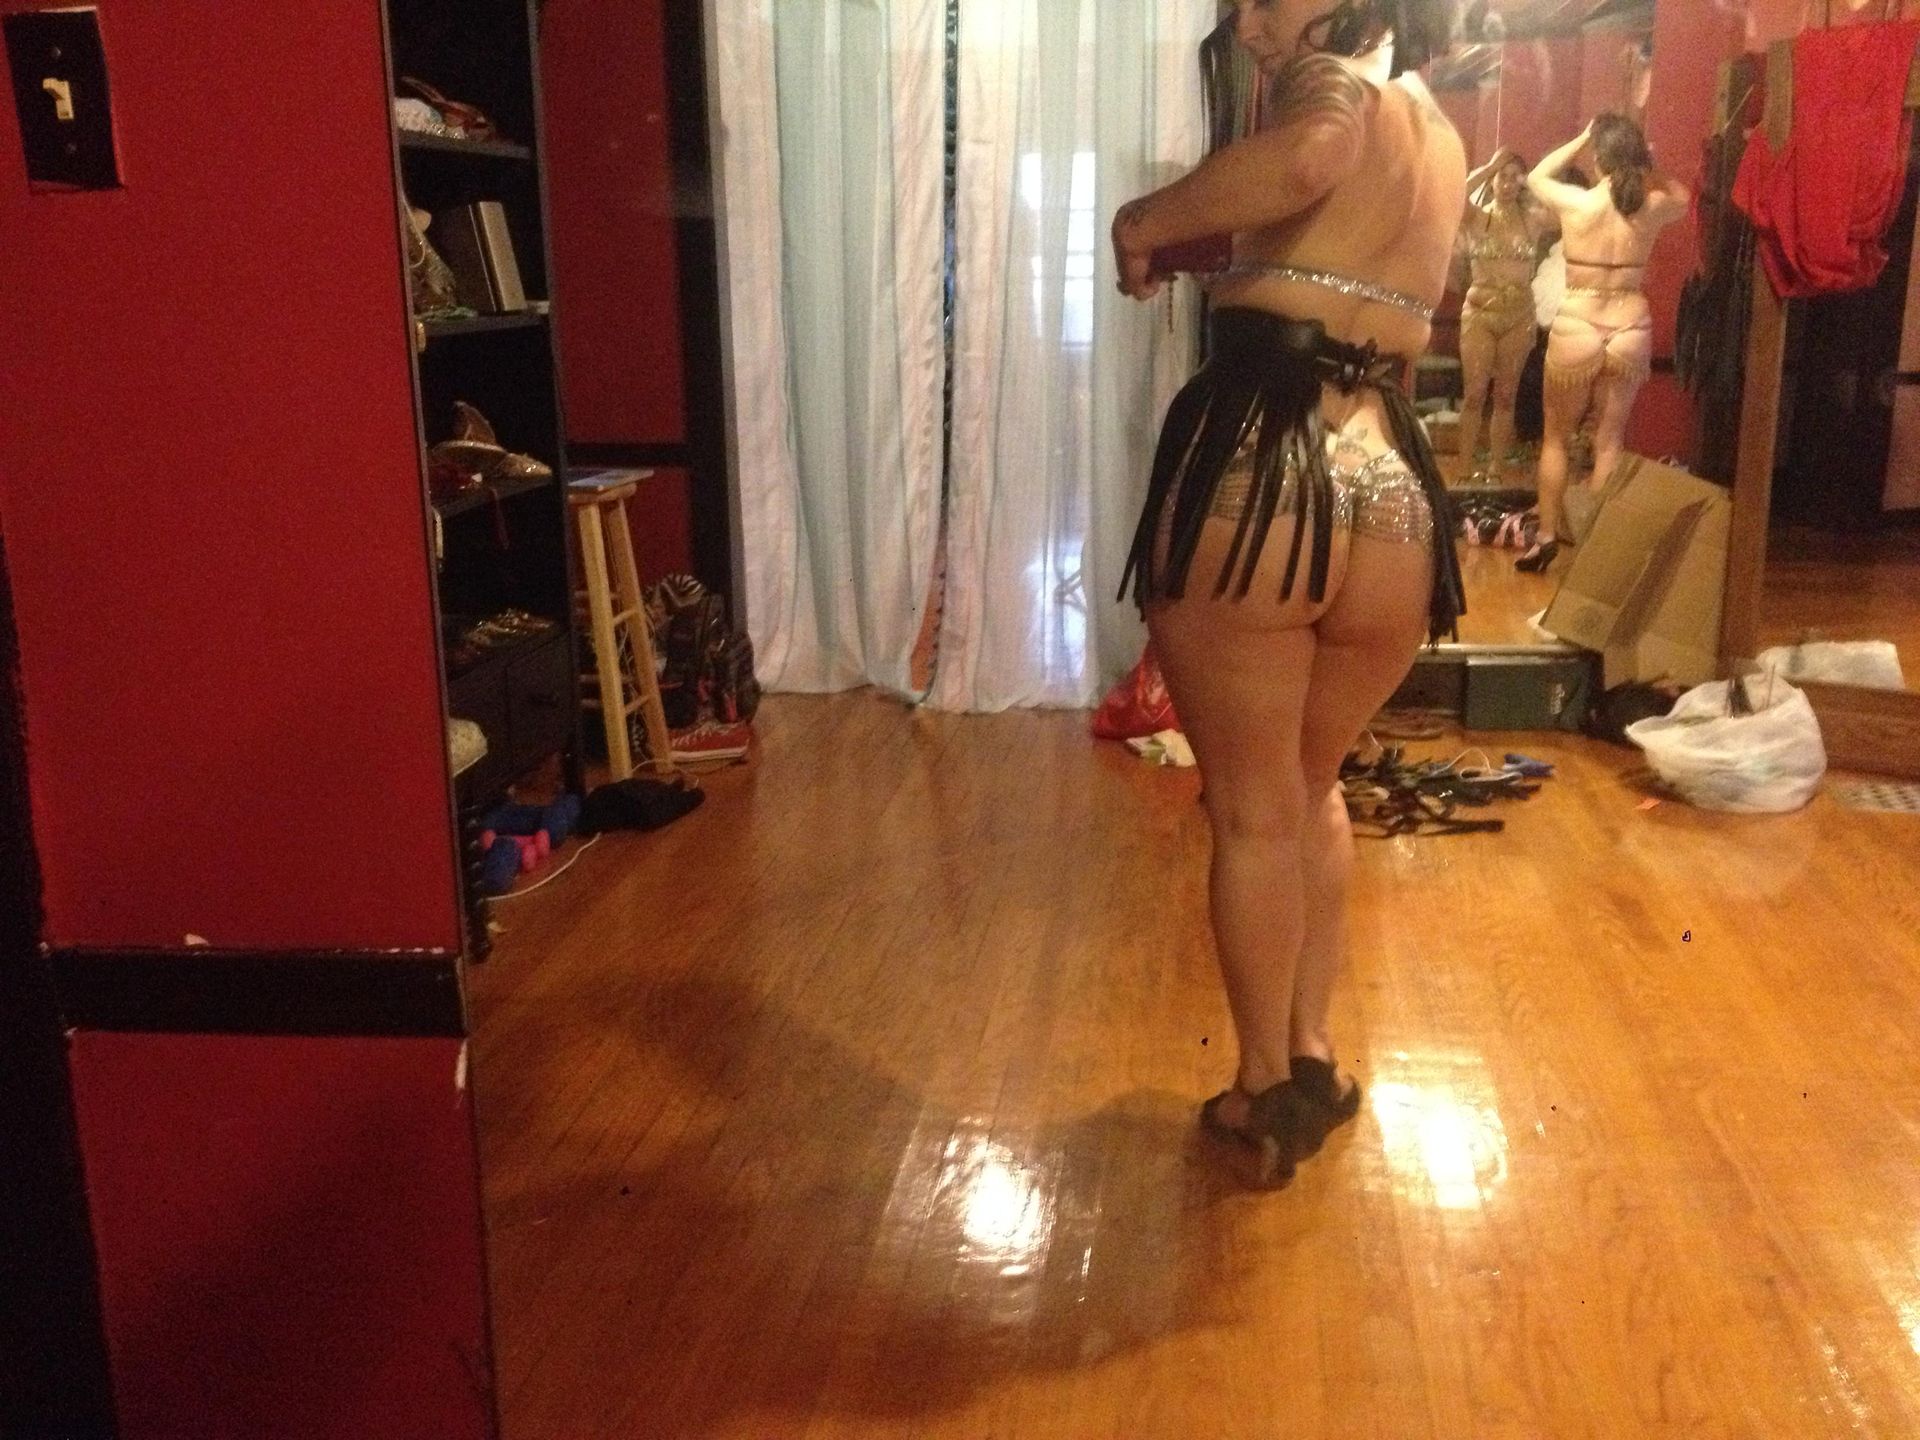 Danielle colby leaked photos